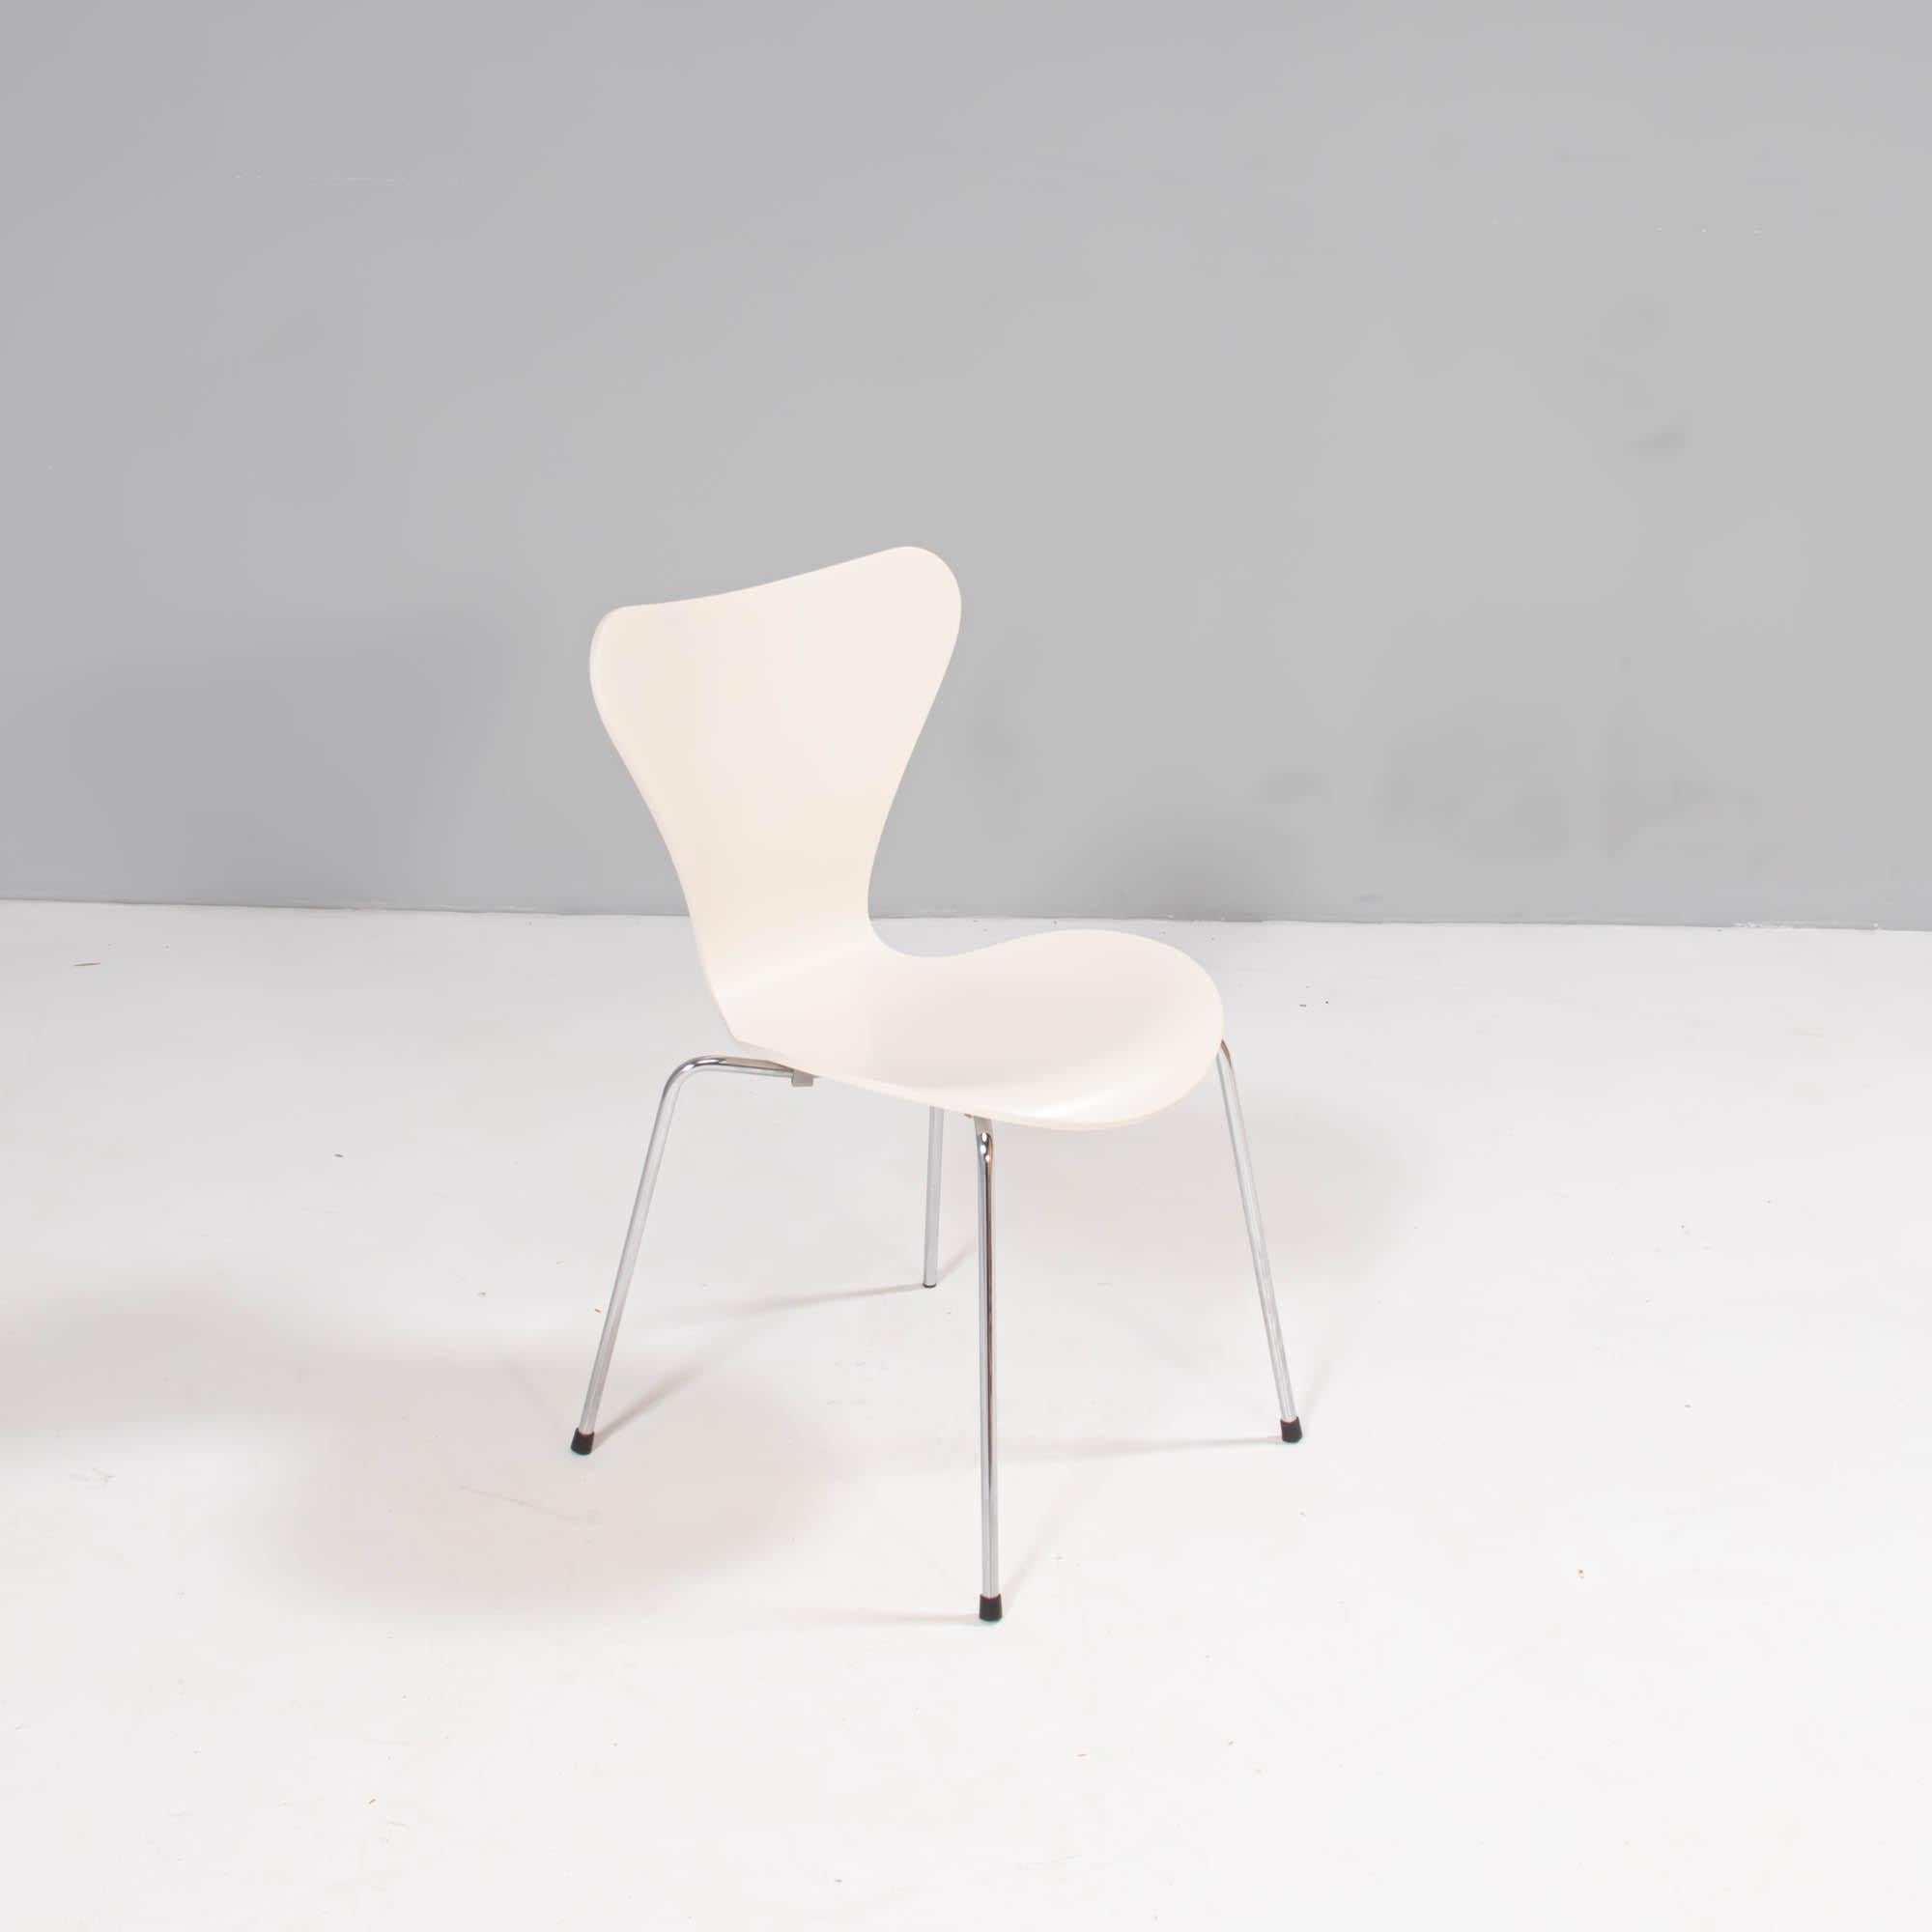 Originally designed by Arne Jacobsen in 1955, the Series 7 dining chair has been made by Fritz Hansen ever since. A true design icon, the Series 7 has become one of the best selling chairs in history.

Constructed from a pressure moulded veneer